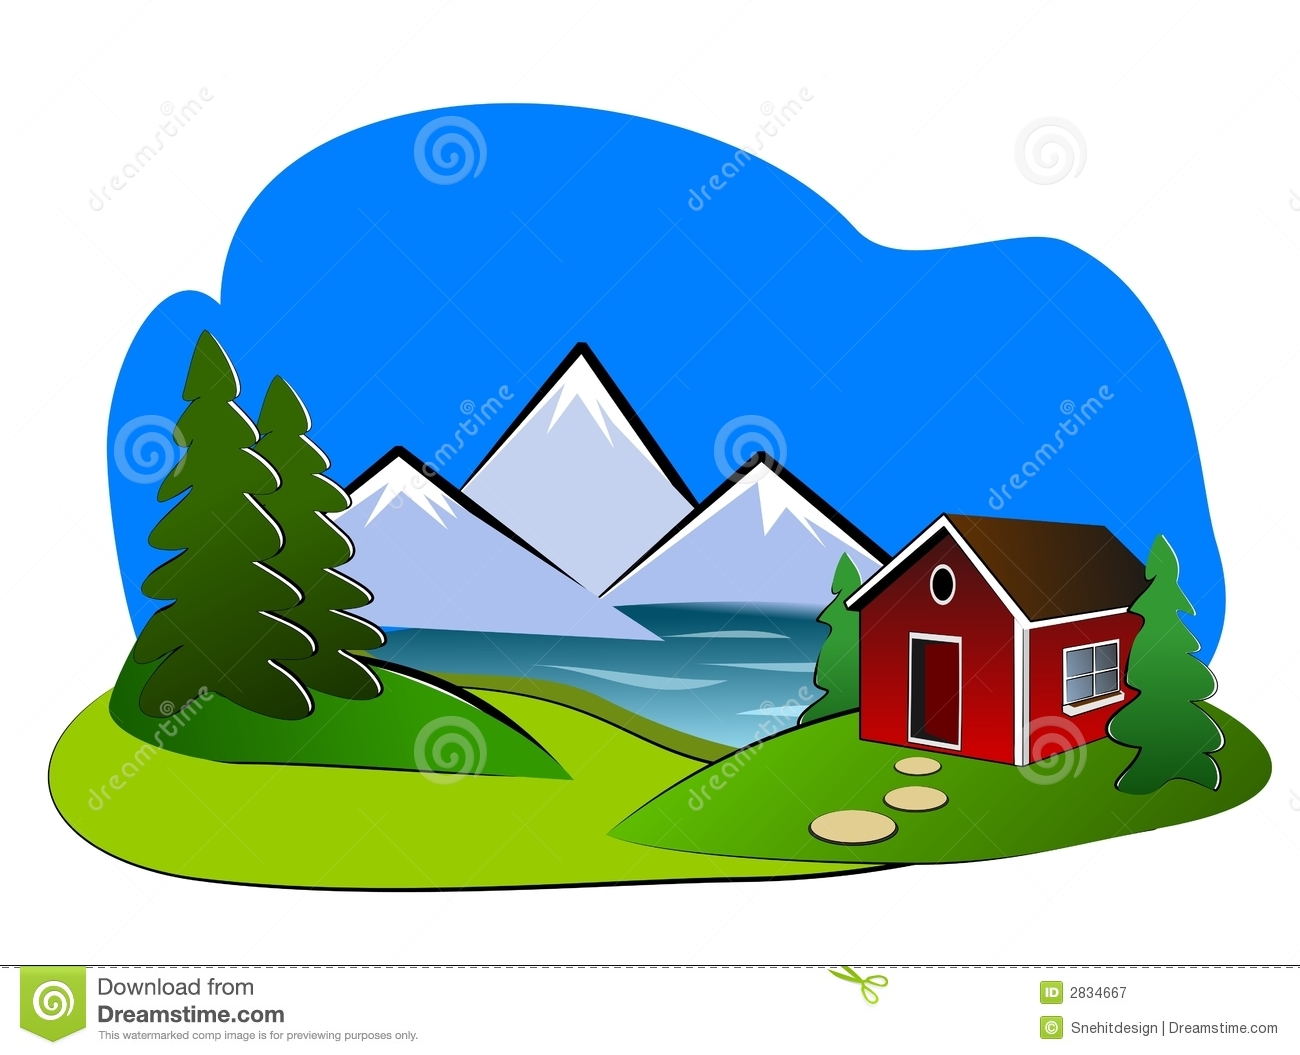 Landscape Clipart Royalty Free Stock Photography   Image  2834667